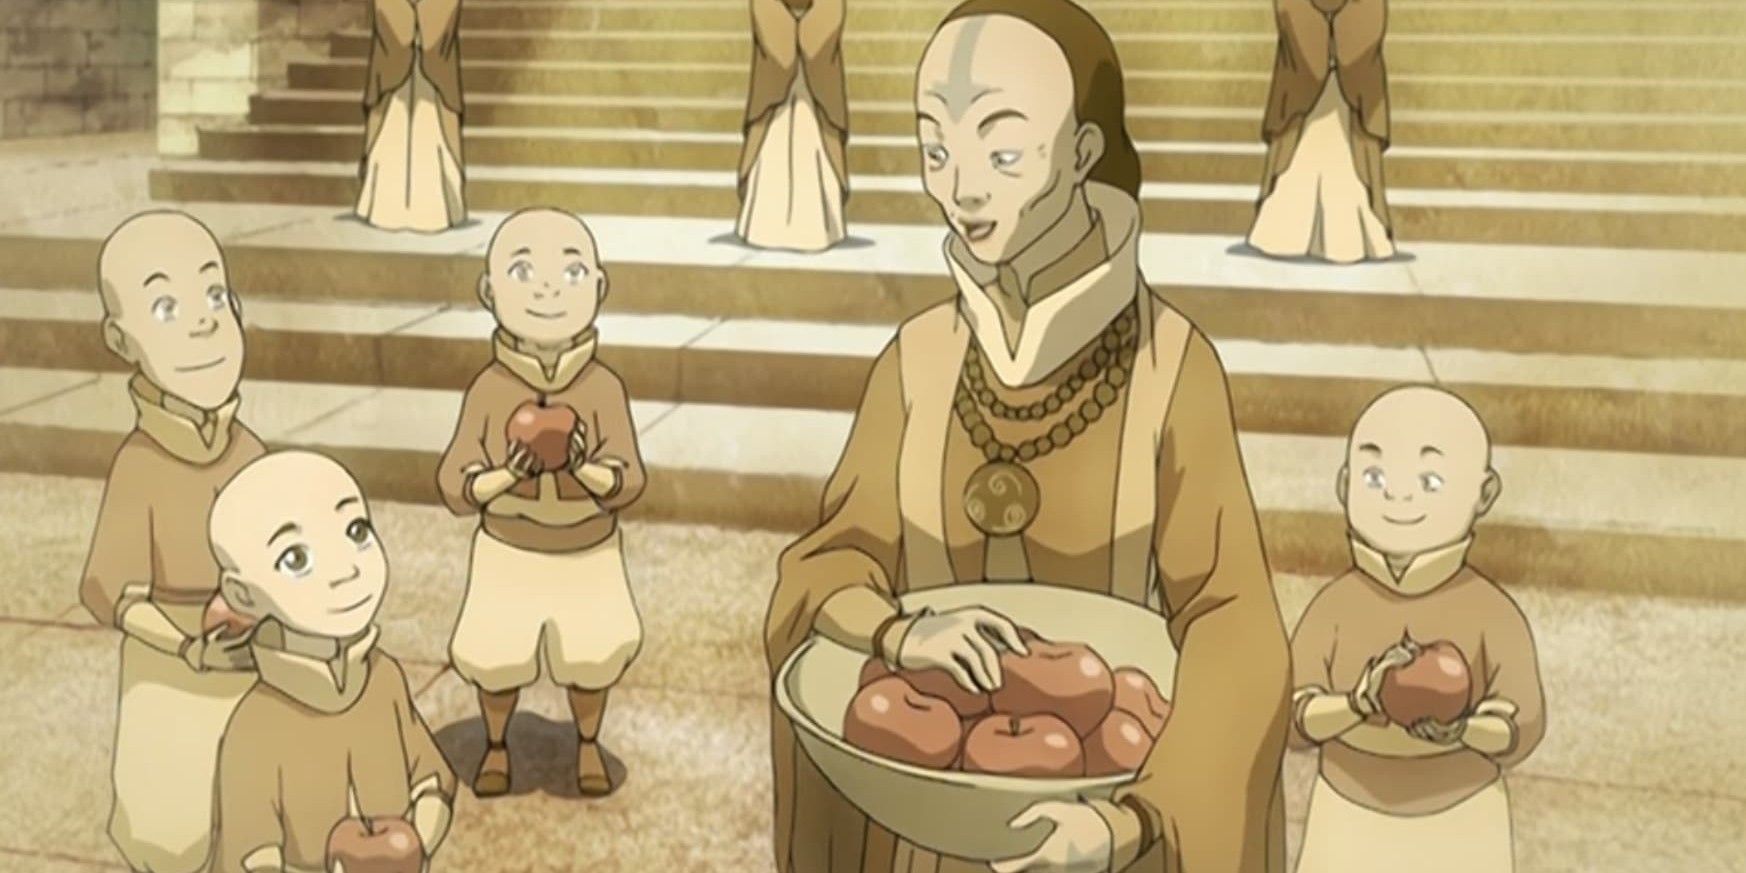 The Air Nomad Monk hands out apples to the air bender children in a flashback in Avatar the last airbender